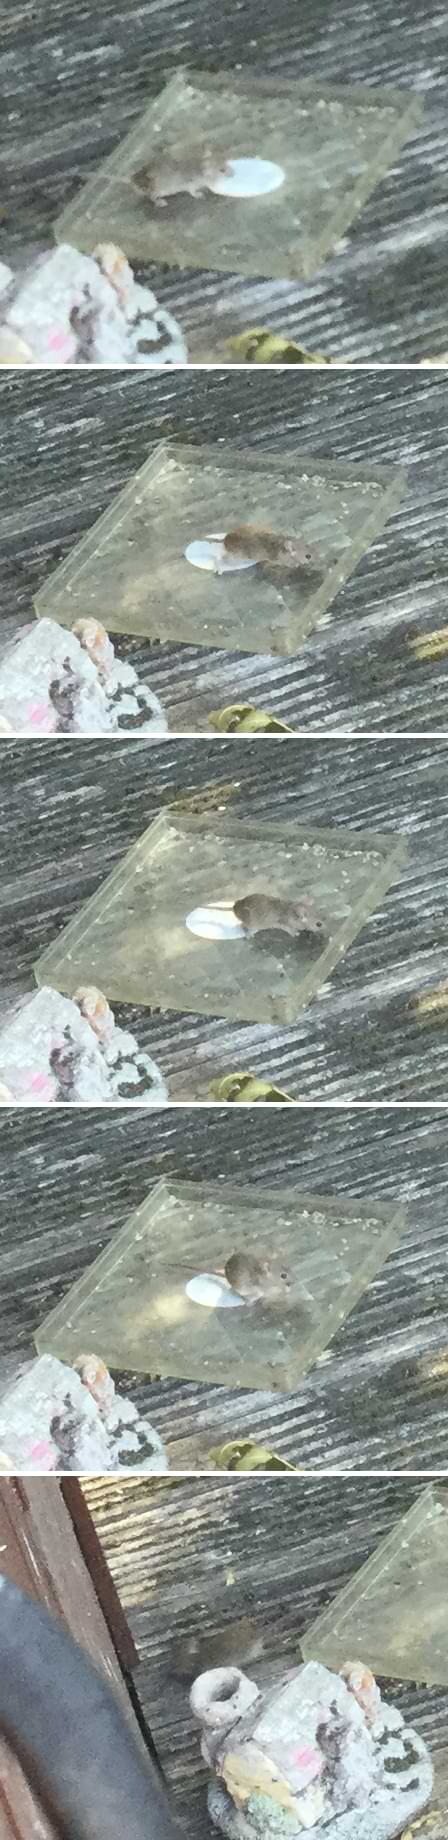 Collage of five blurry photos of a mouse slowly creeping towards a plastic tray, picking up a few bird seeds and then quickly running to cover under a gap in a shed. The mouse has light brown fur covering most of its body with a line of white fur on its underside.